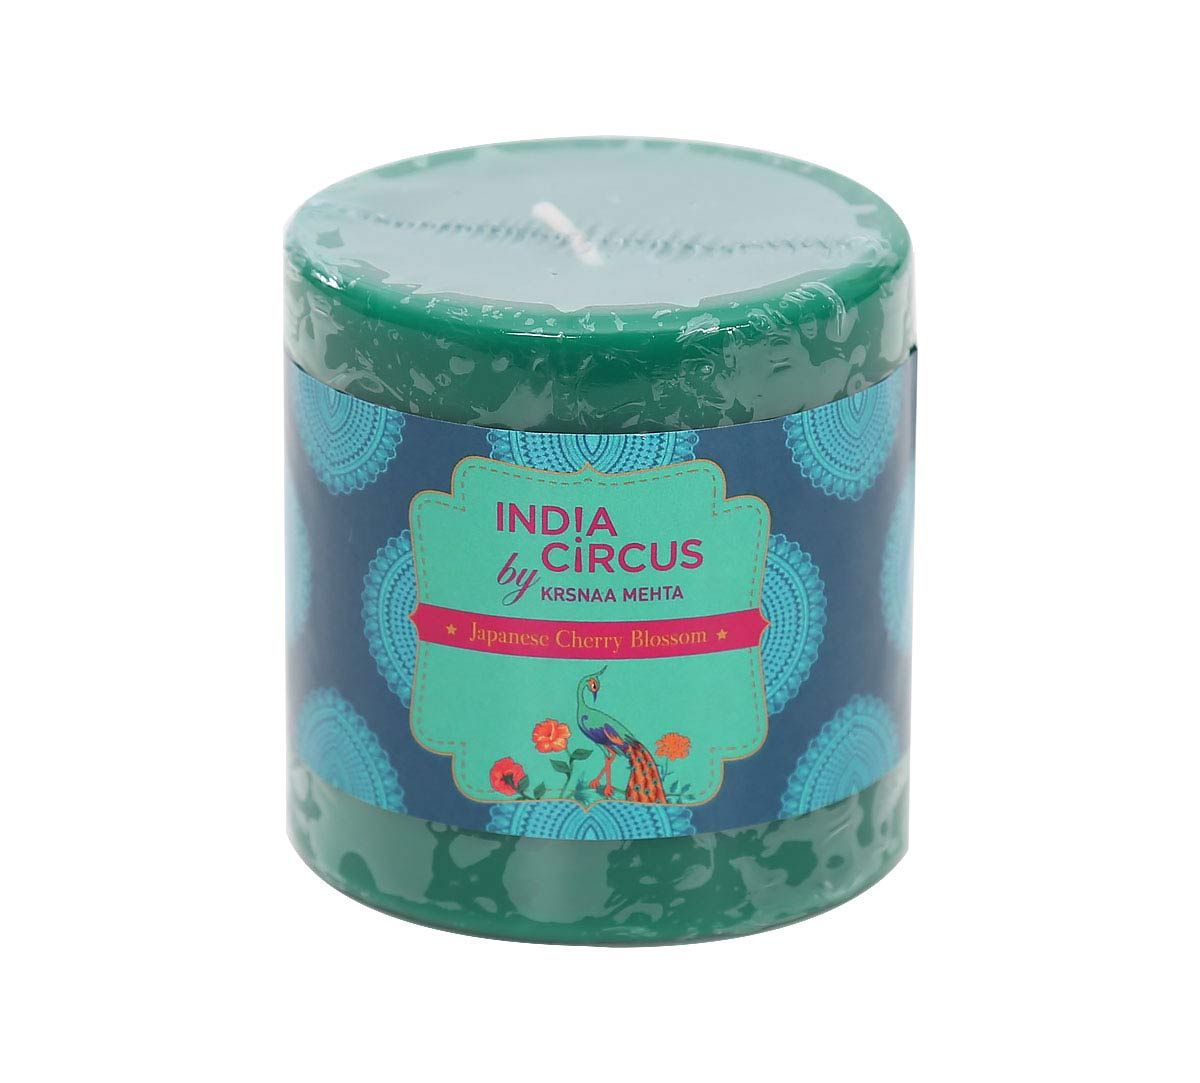 India Circus Japanese Cherry Blossom Drum Candle